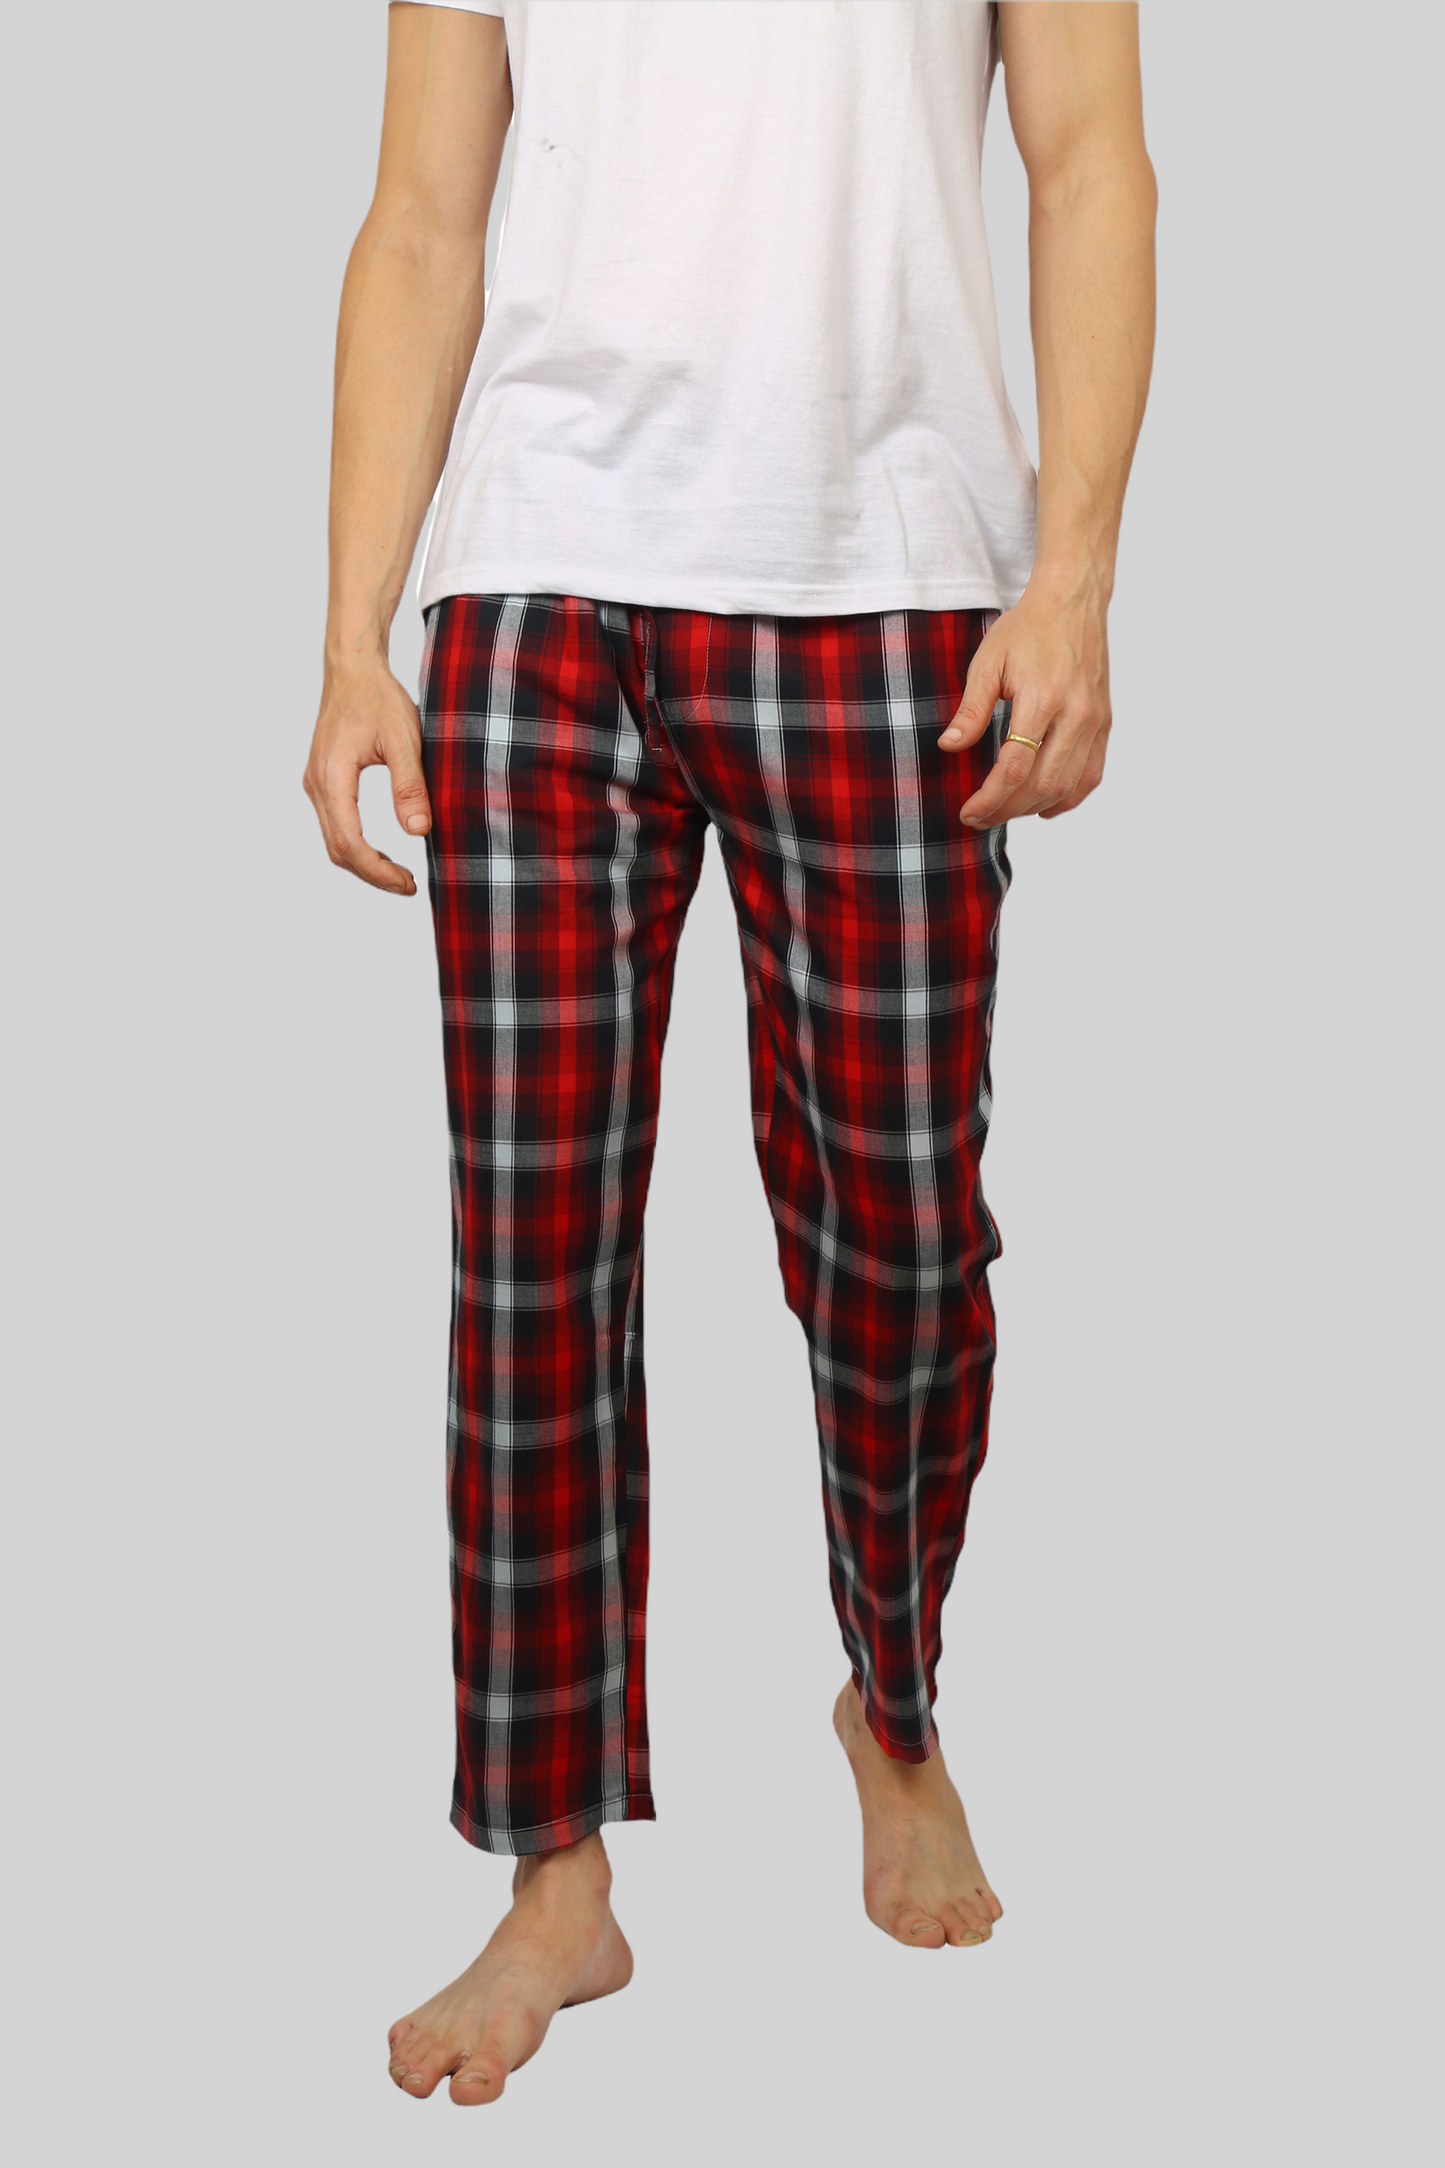 Deep Red soft and super comfortable checkered pajamas for men